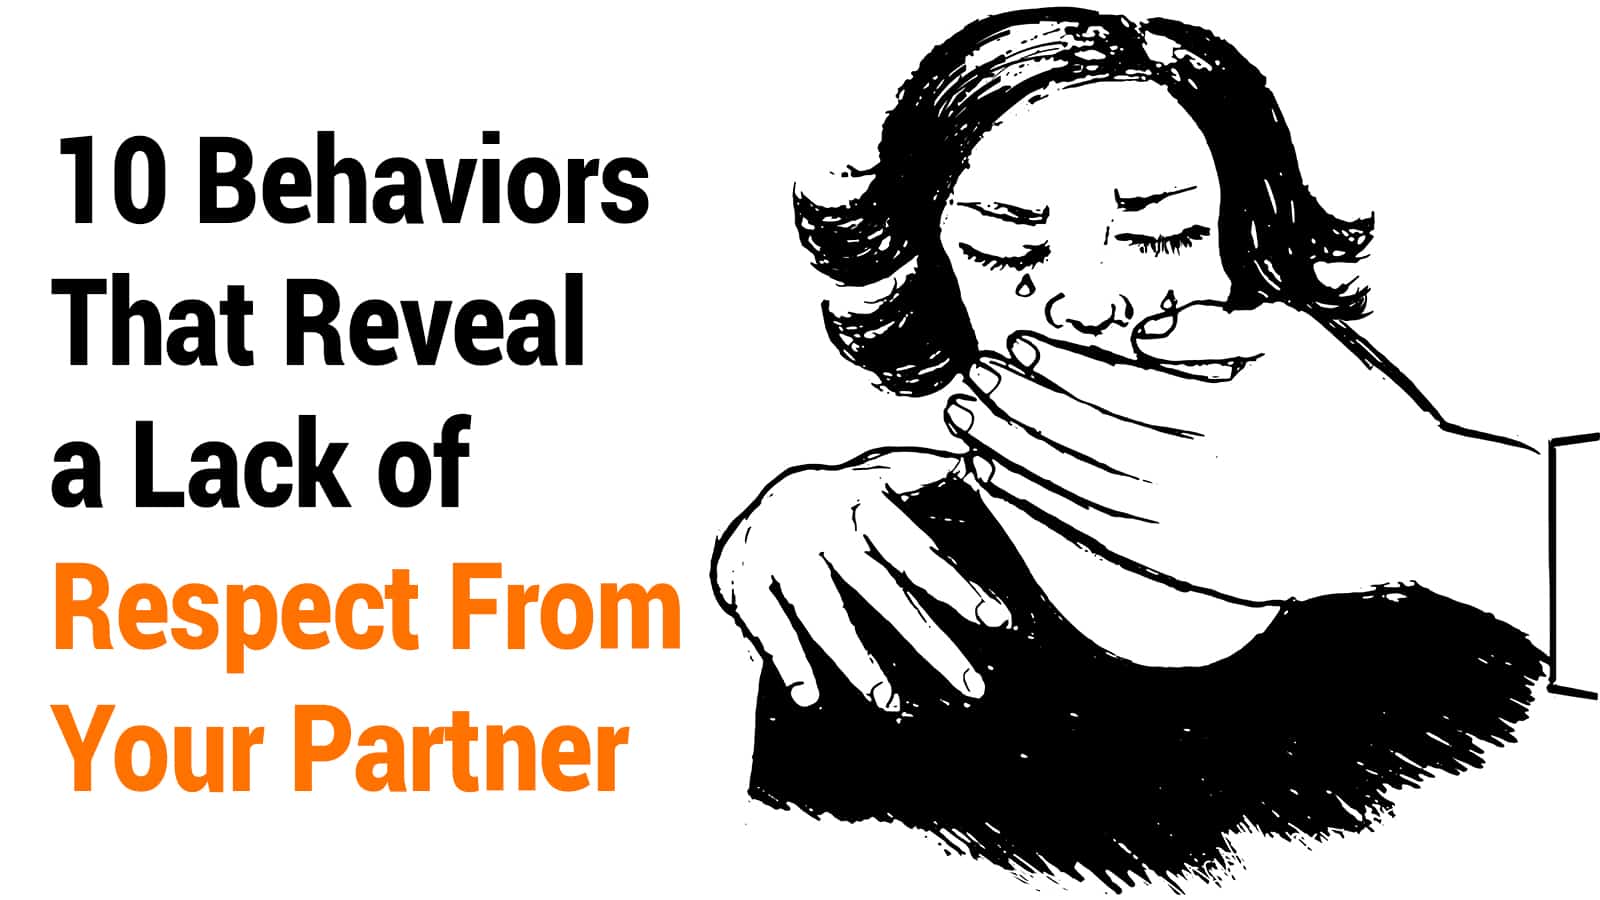 10 Behaviors That Reveal a Lack of Respect From Your Partner